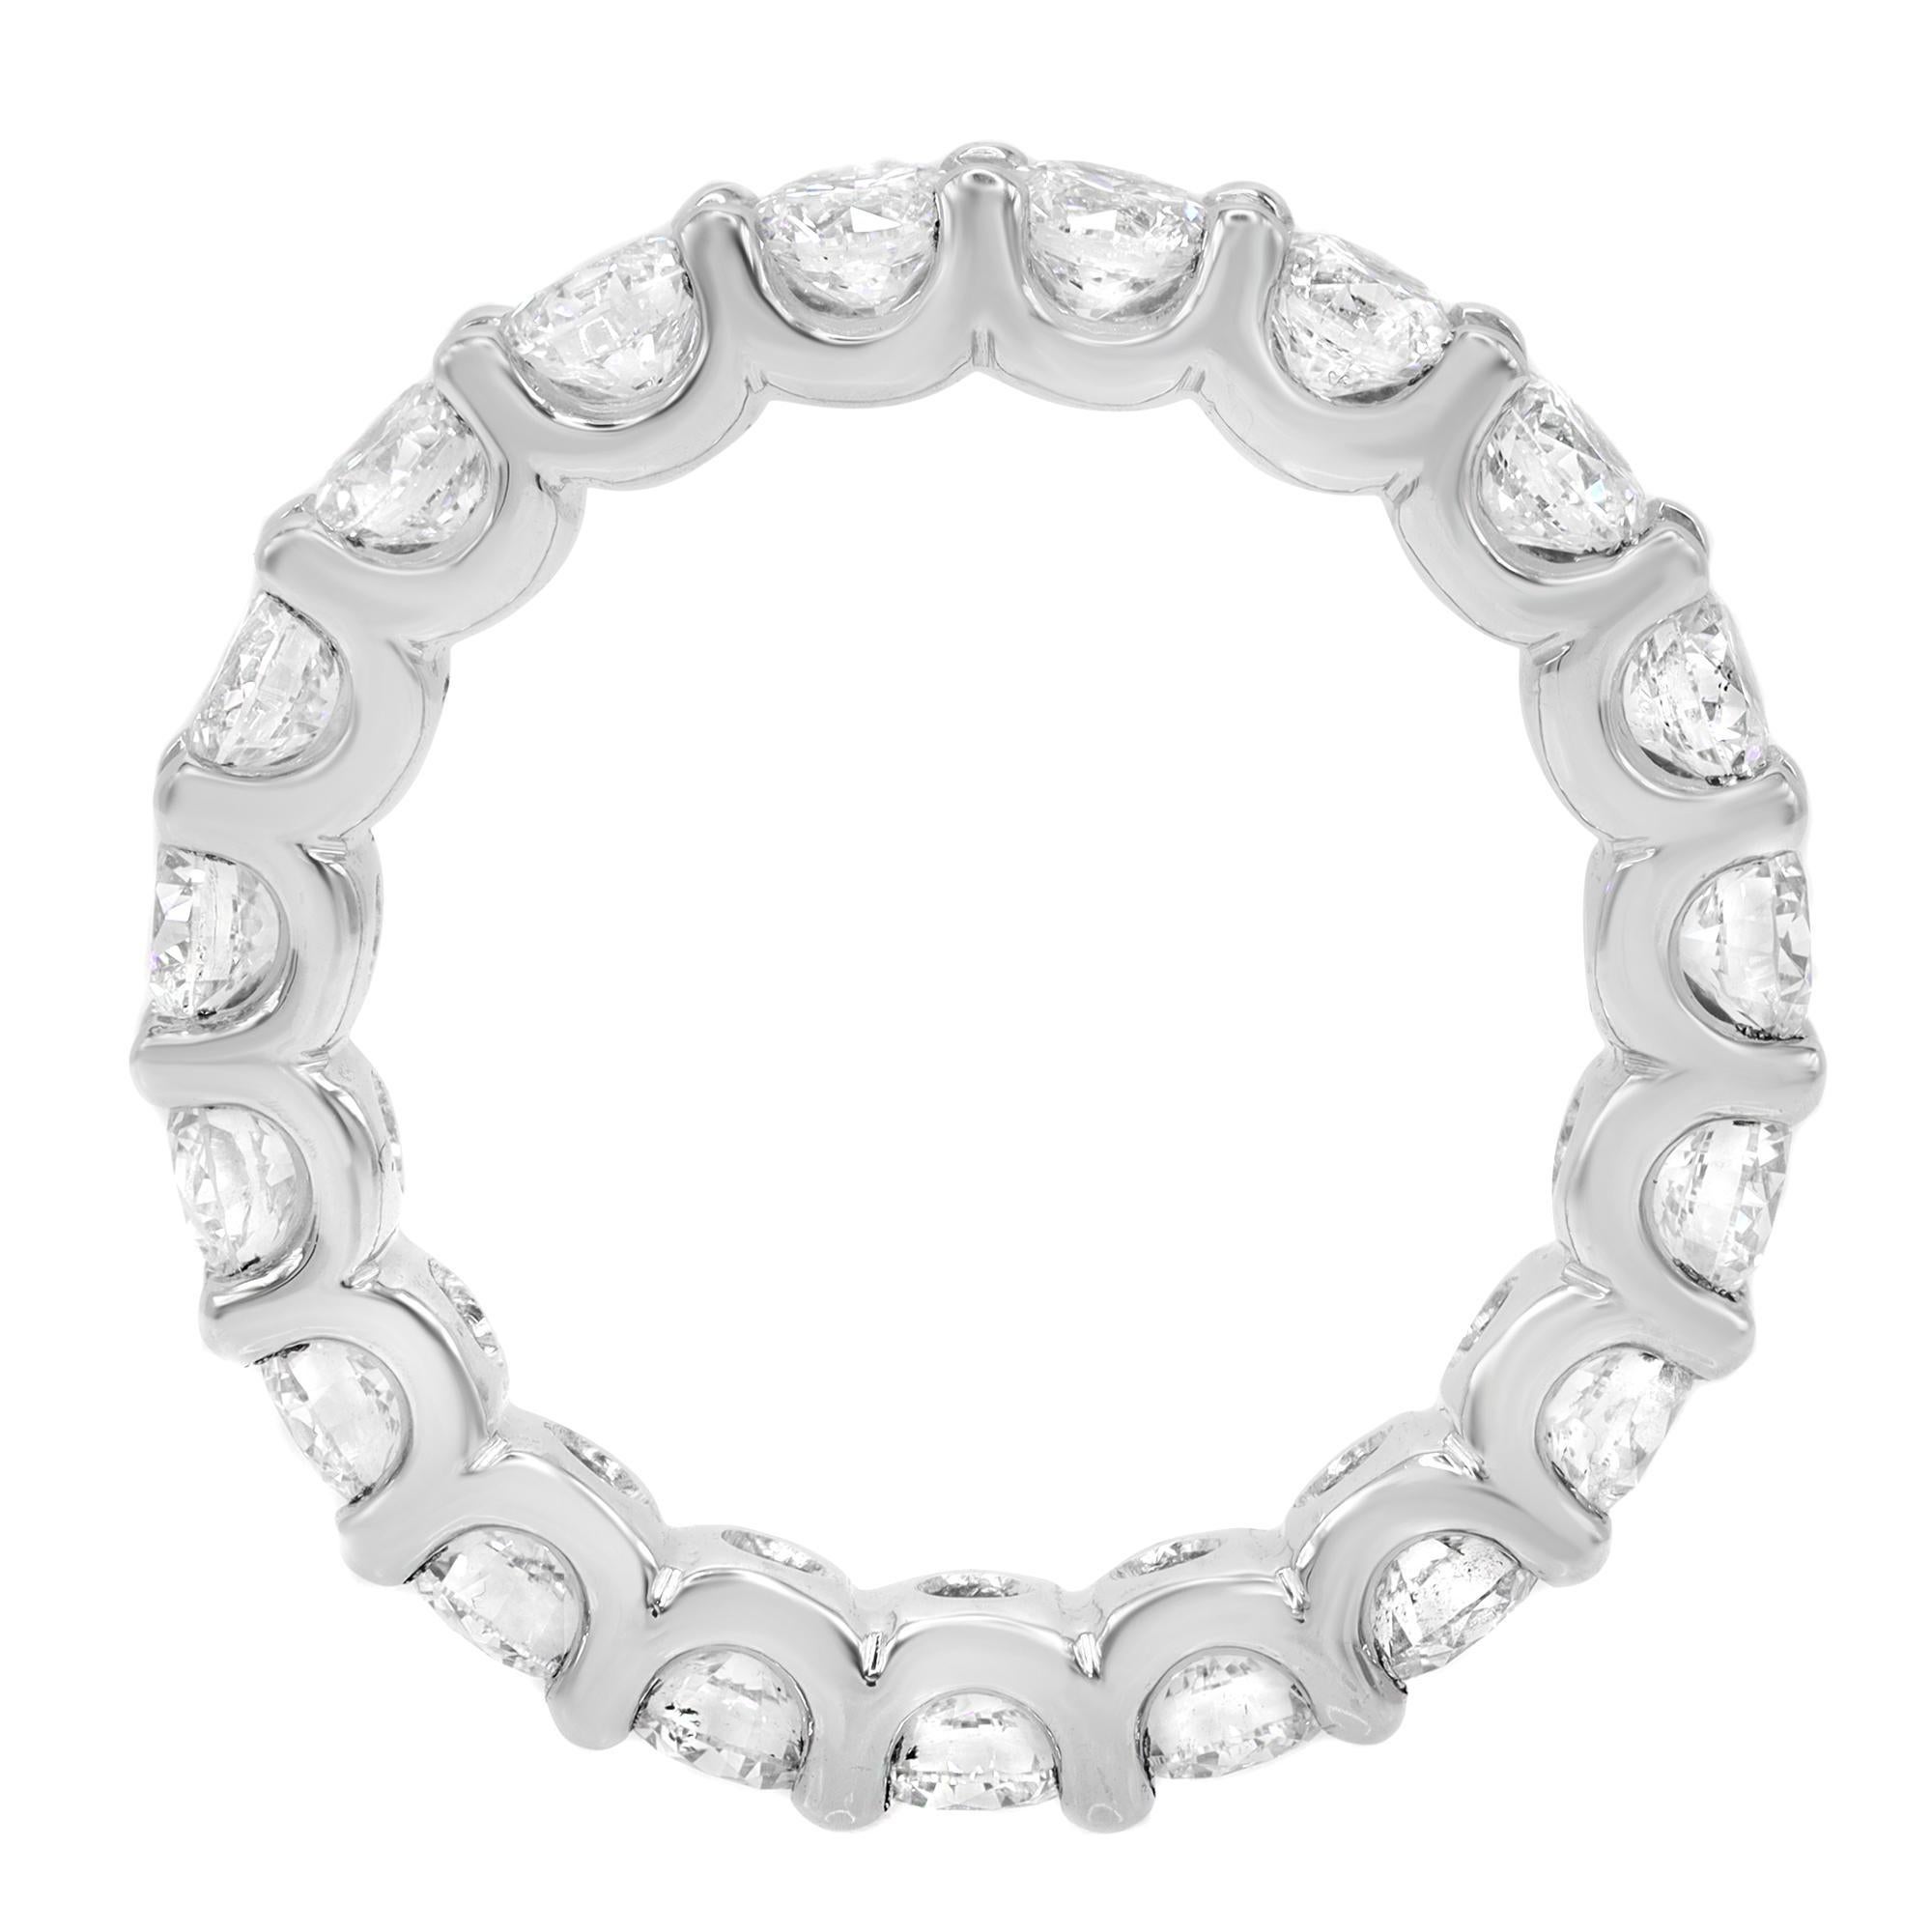  This elegant 18k white gold eternity band is illuminated with 19 brilliant white stones flooded with light as they sit inside curved u-prong settings. Total carat weight: 2.89. Diamond color F and VS clarity. Width of the ring is 3.70mm. Ring size